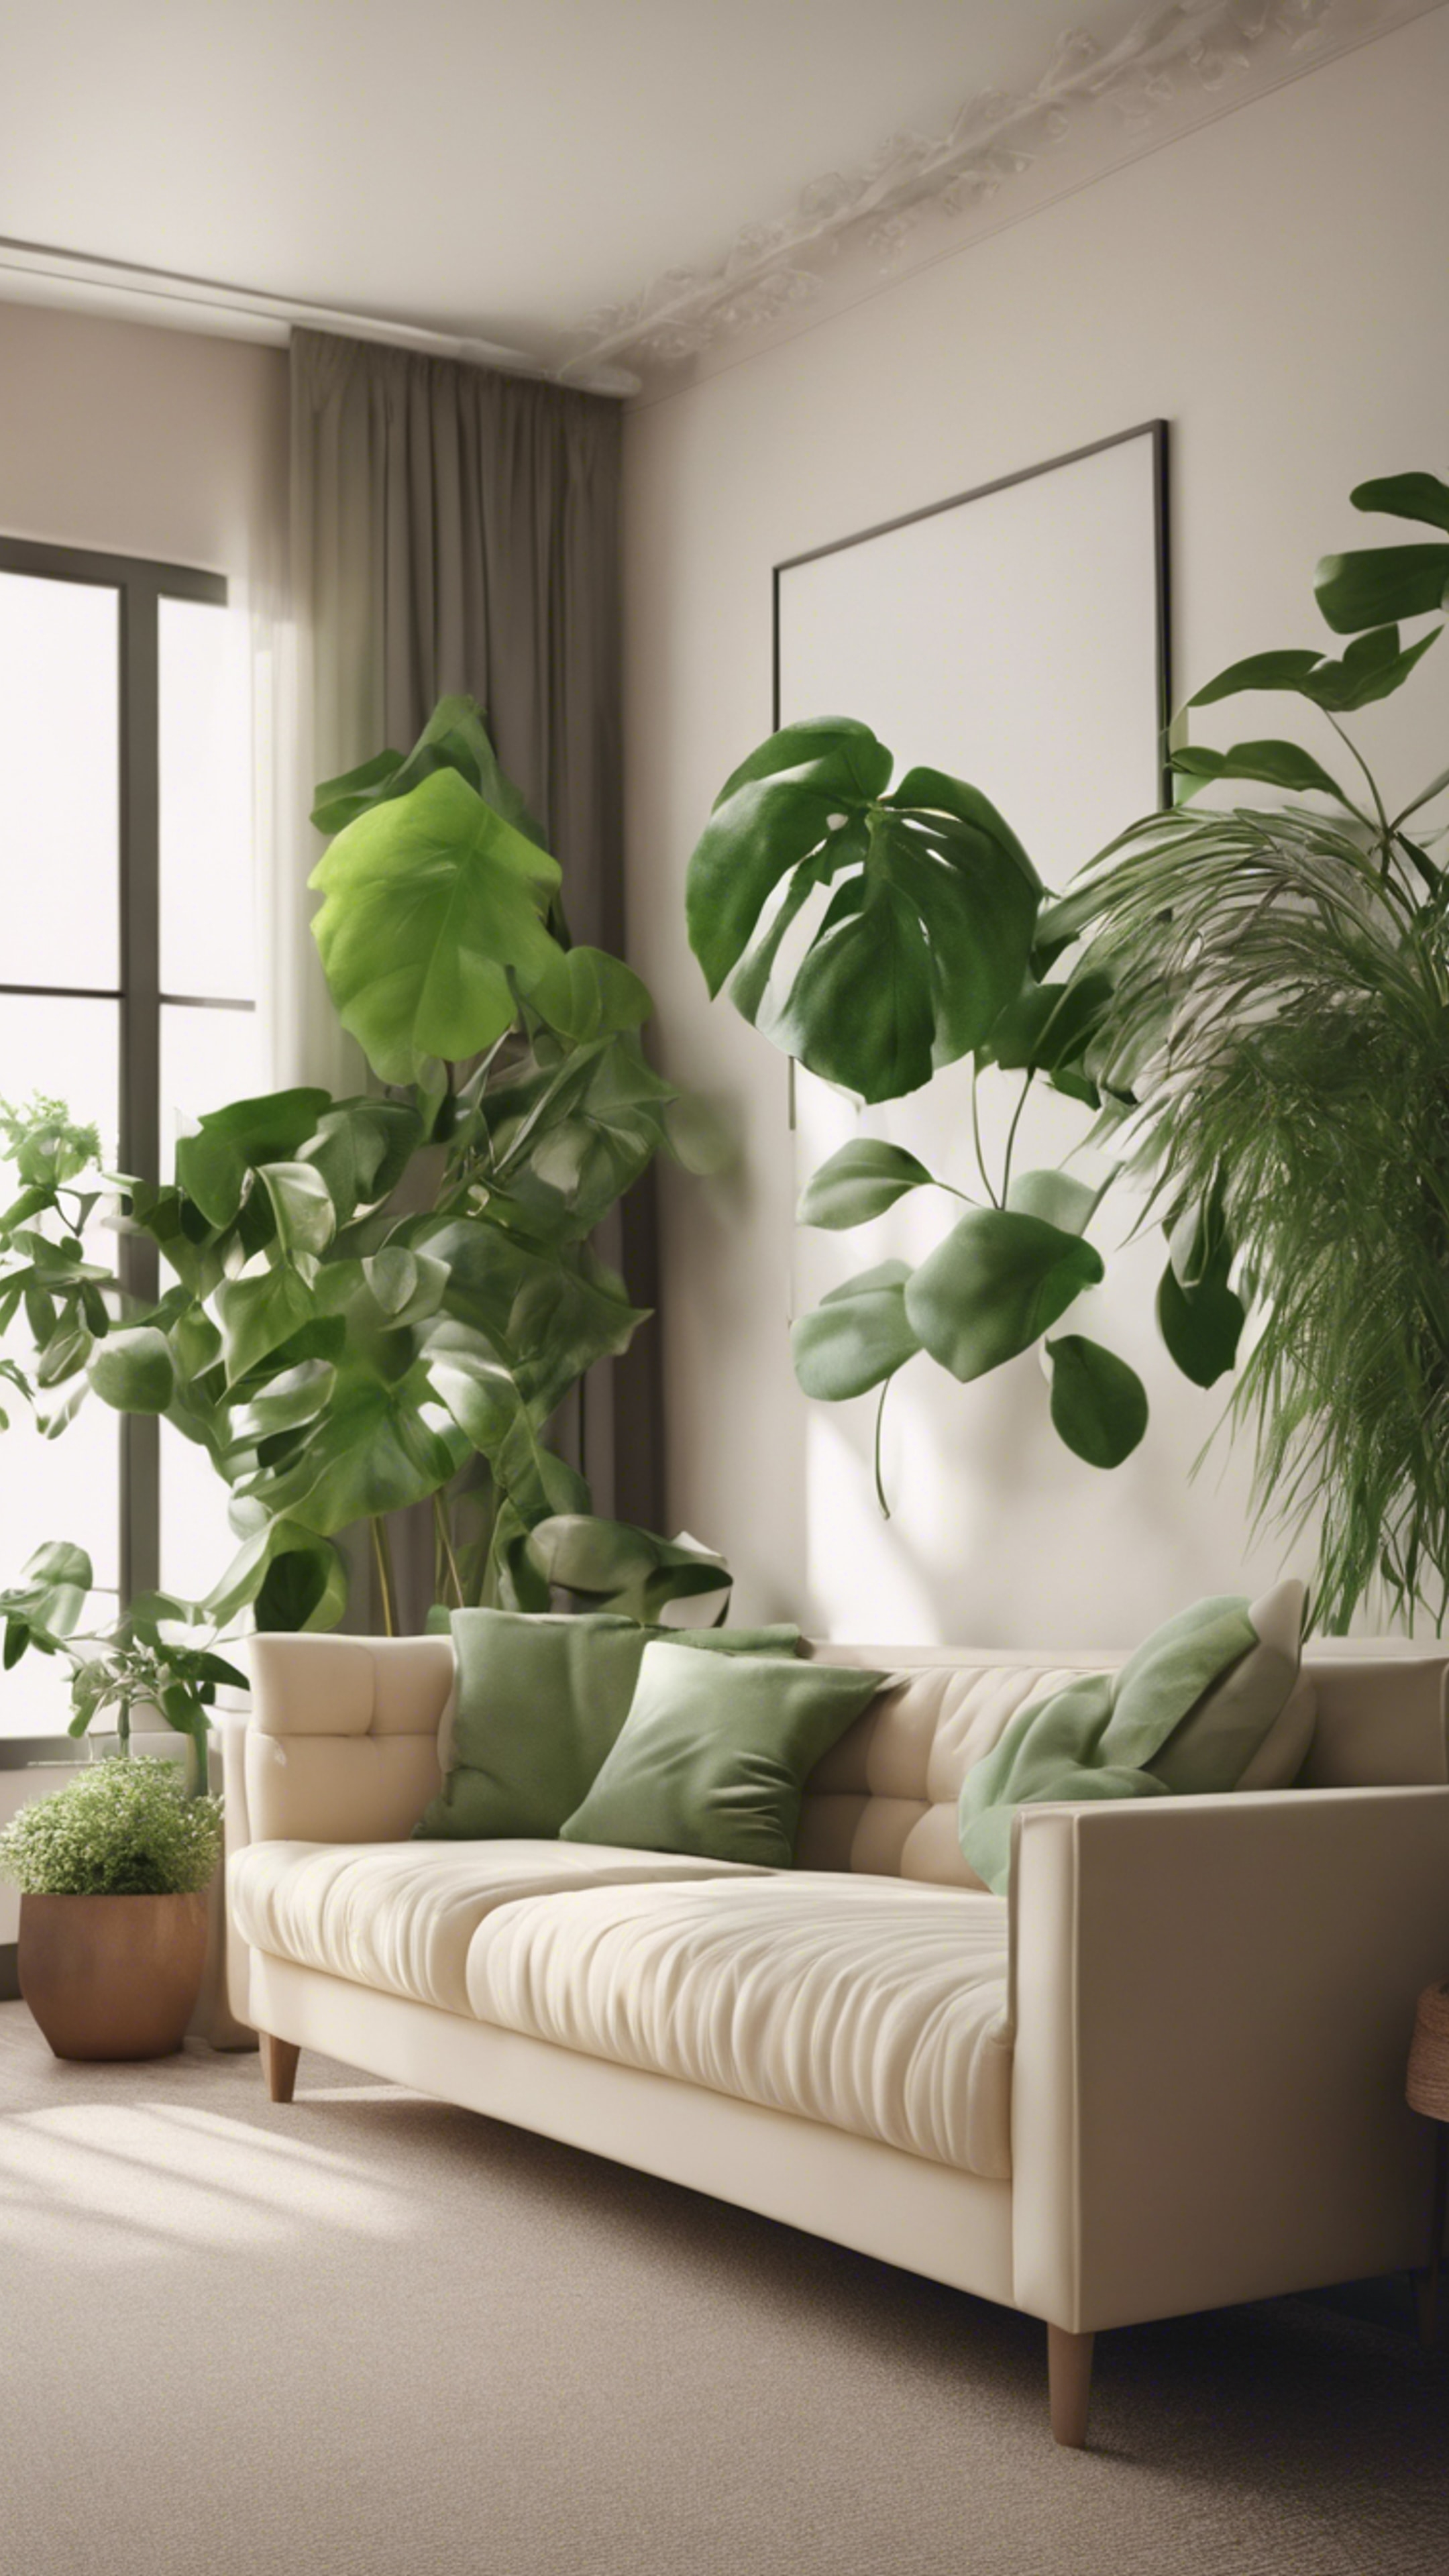 A simplistic living room featuring a cream couch contrasted with a natural green aesthetic of indoor plants Tapet[57c4f329650745189cc4]